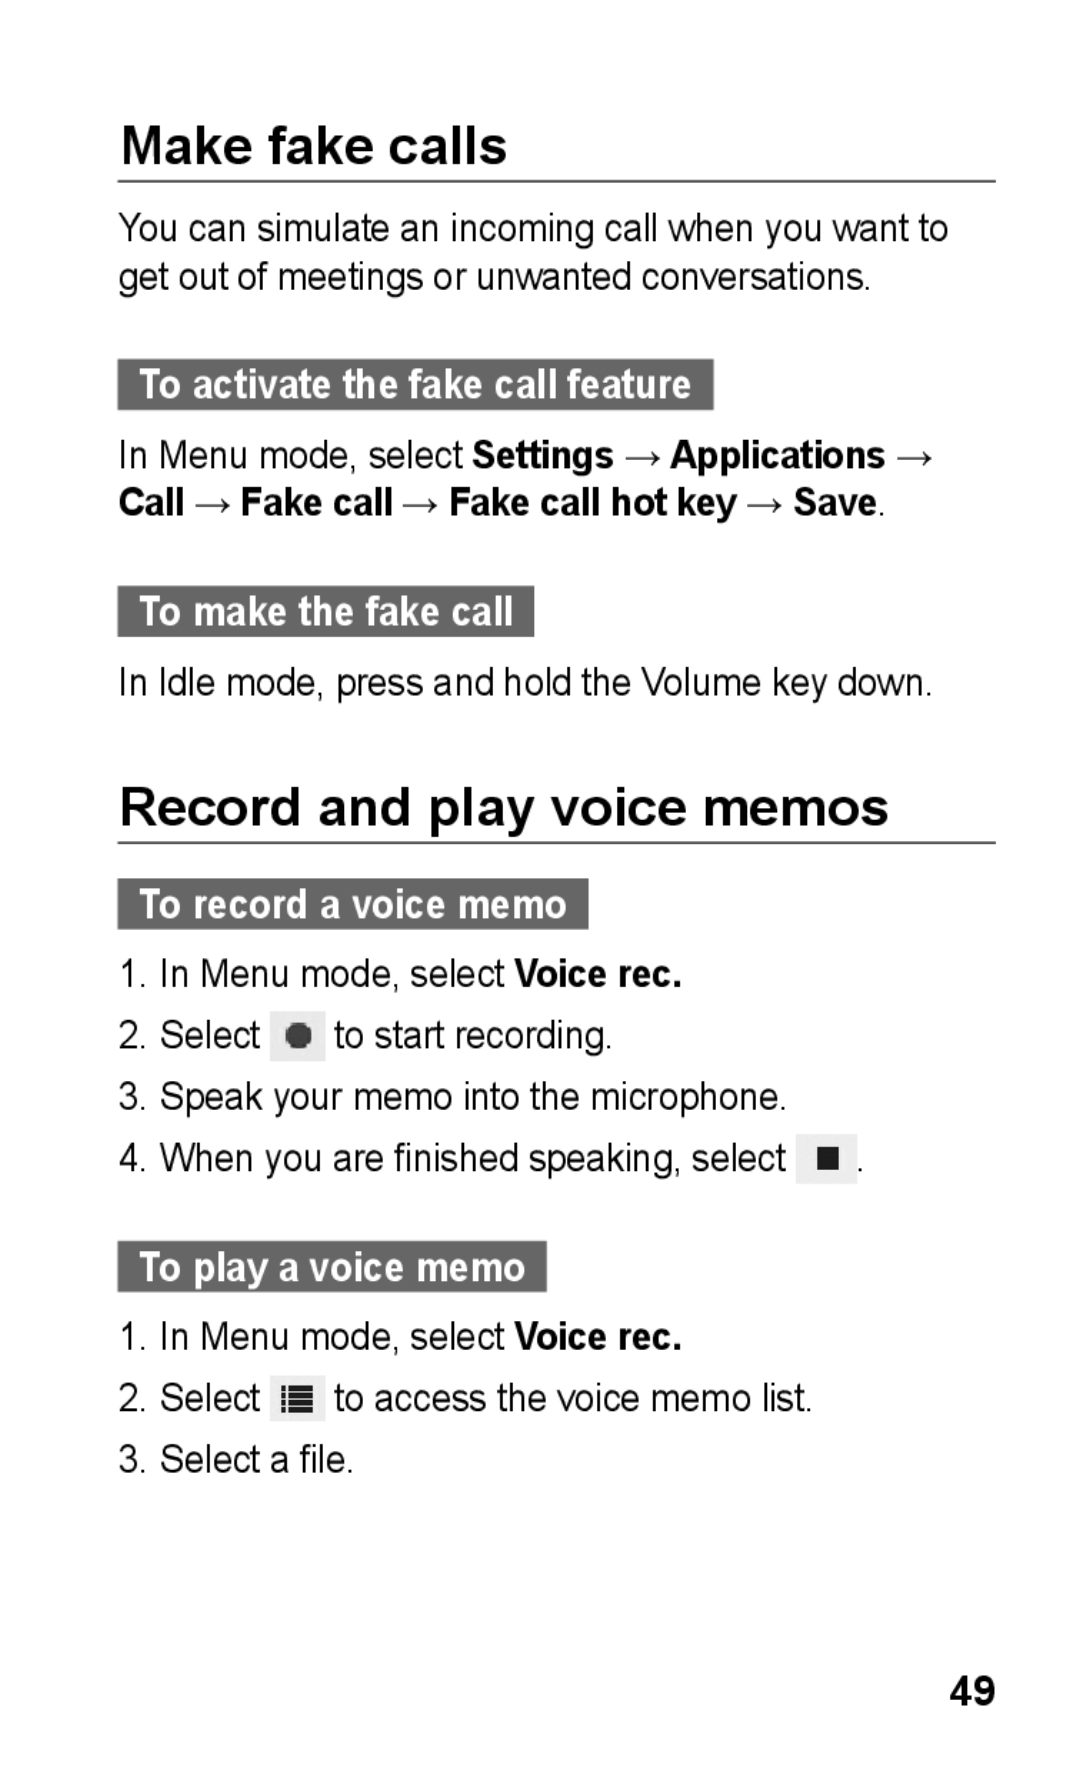 Samsung GT-S5260OKPMTL, GT-S5260RWPDBT Make fake calls, Record and play voice memos, To activate the fake call feature 